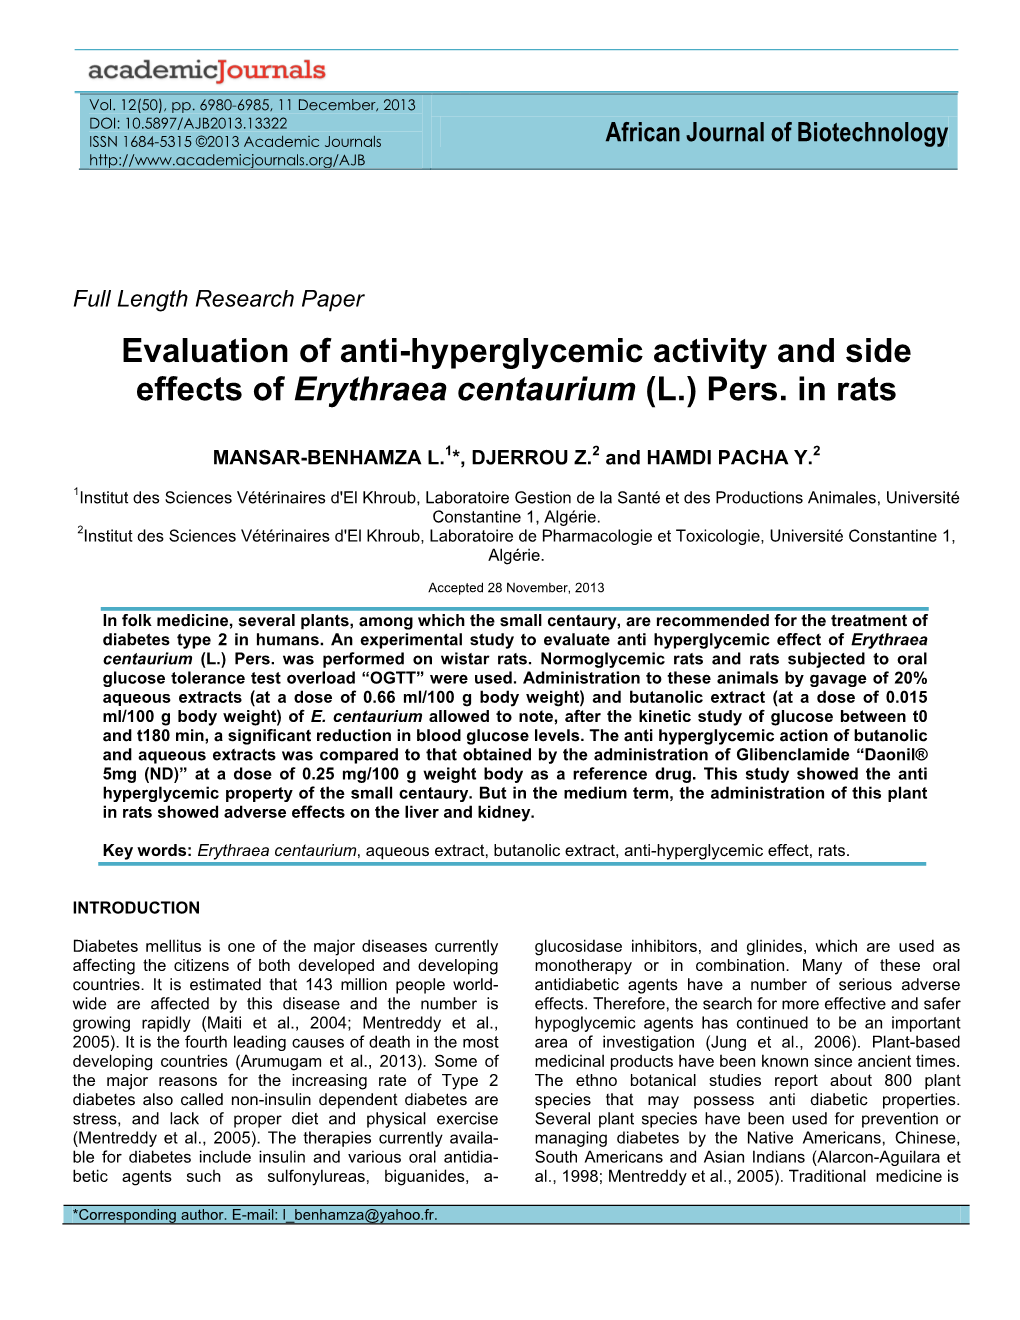 Evaluation of Anti-Hyperglycemic Activity and Side Effects of Erythraea Centaurium (L.) Pers